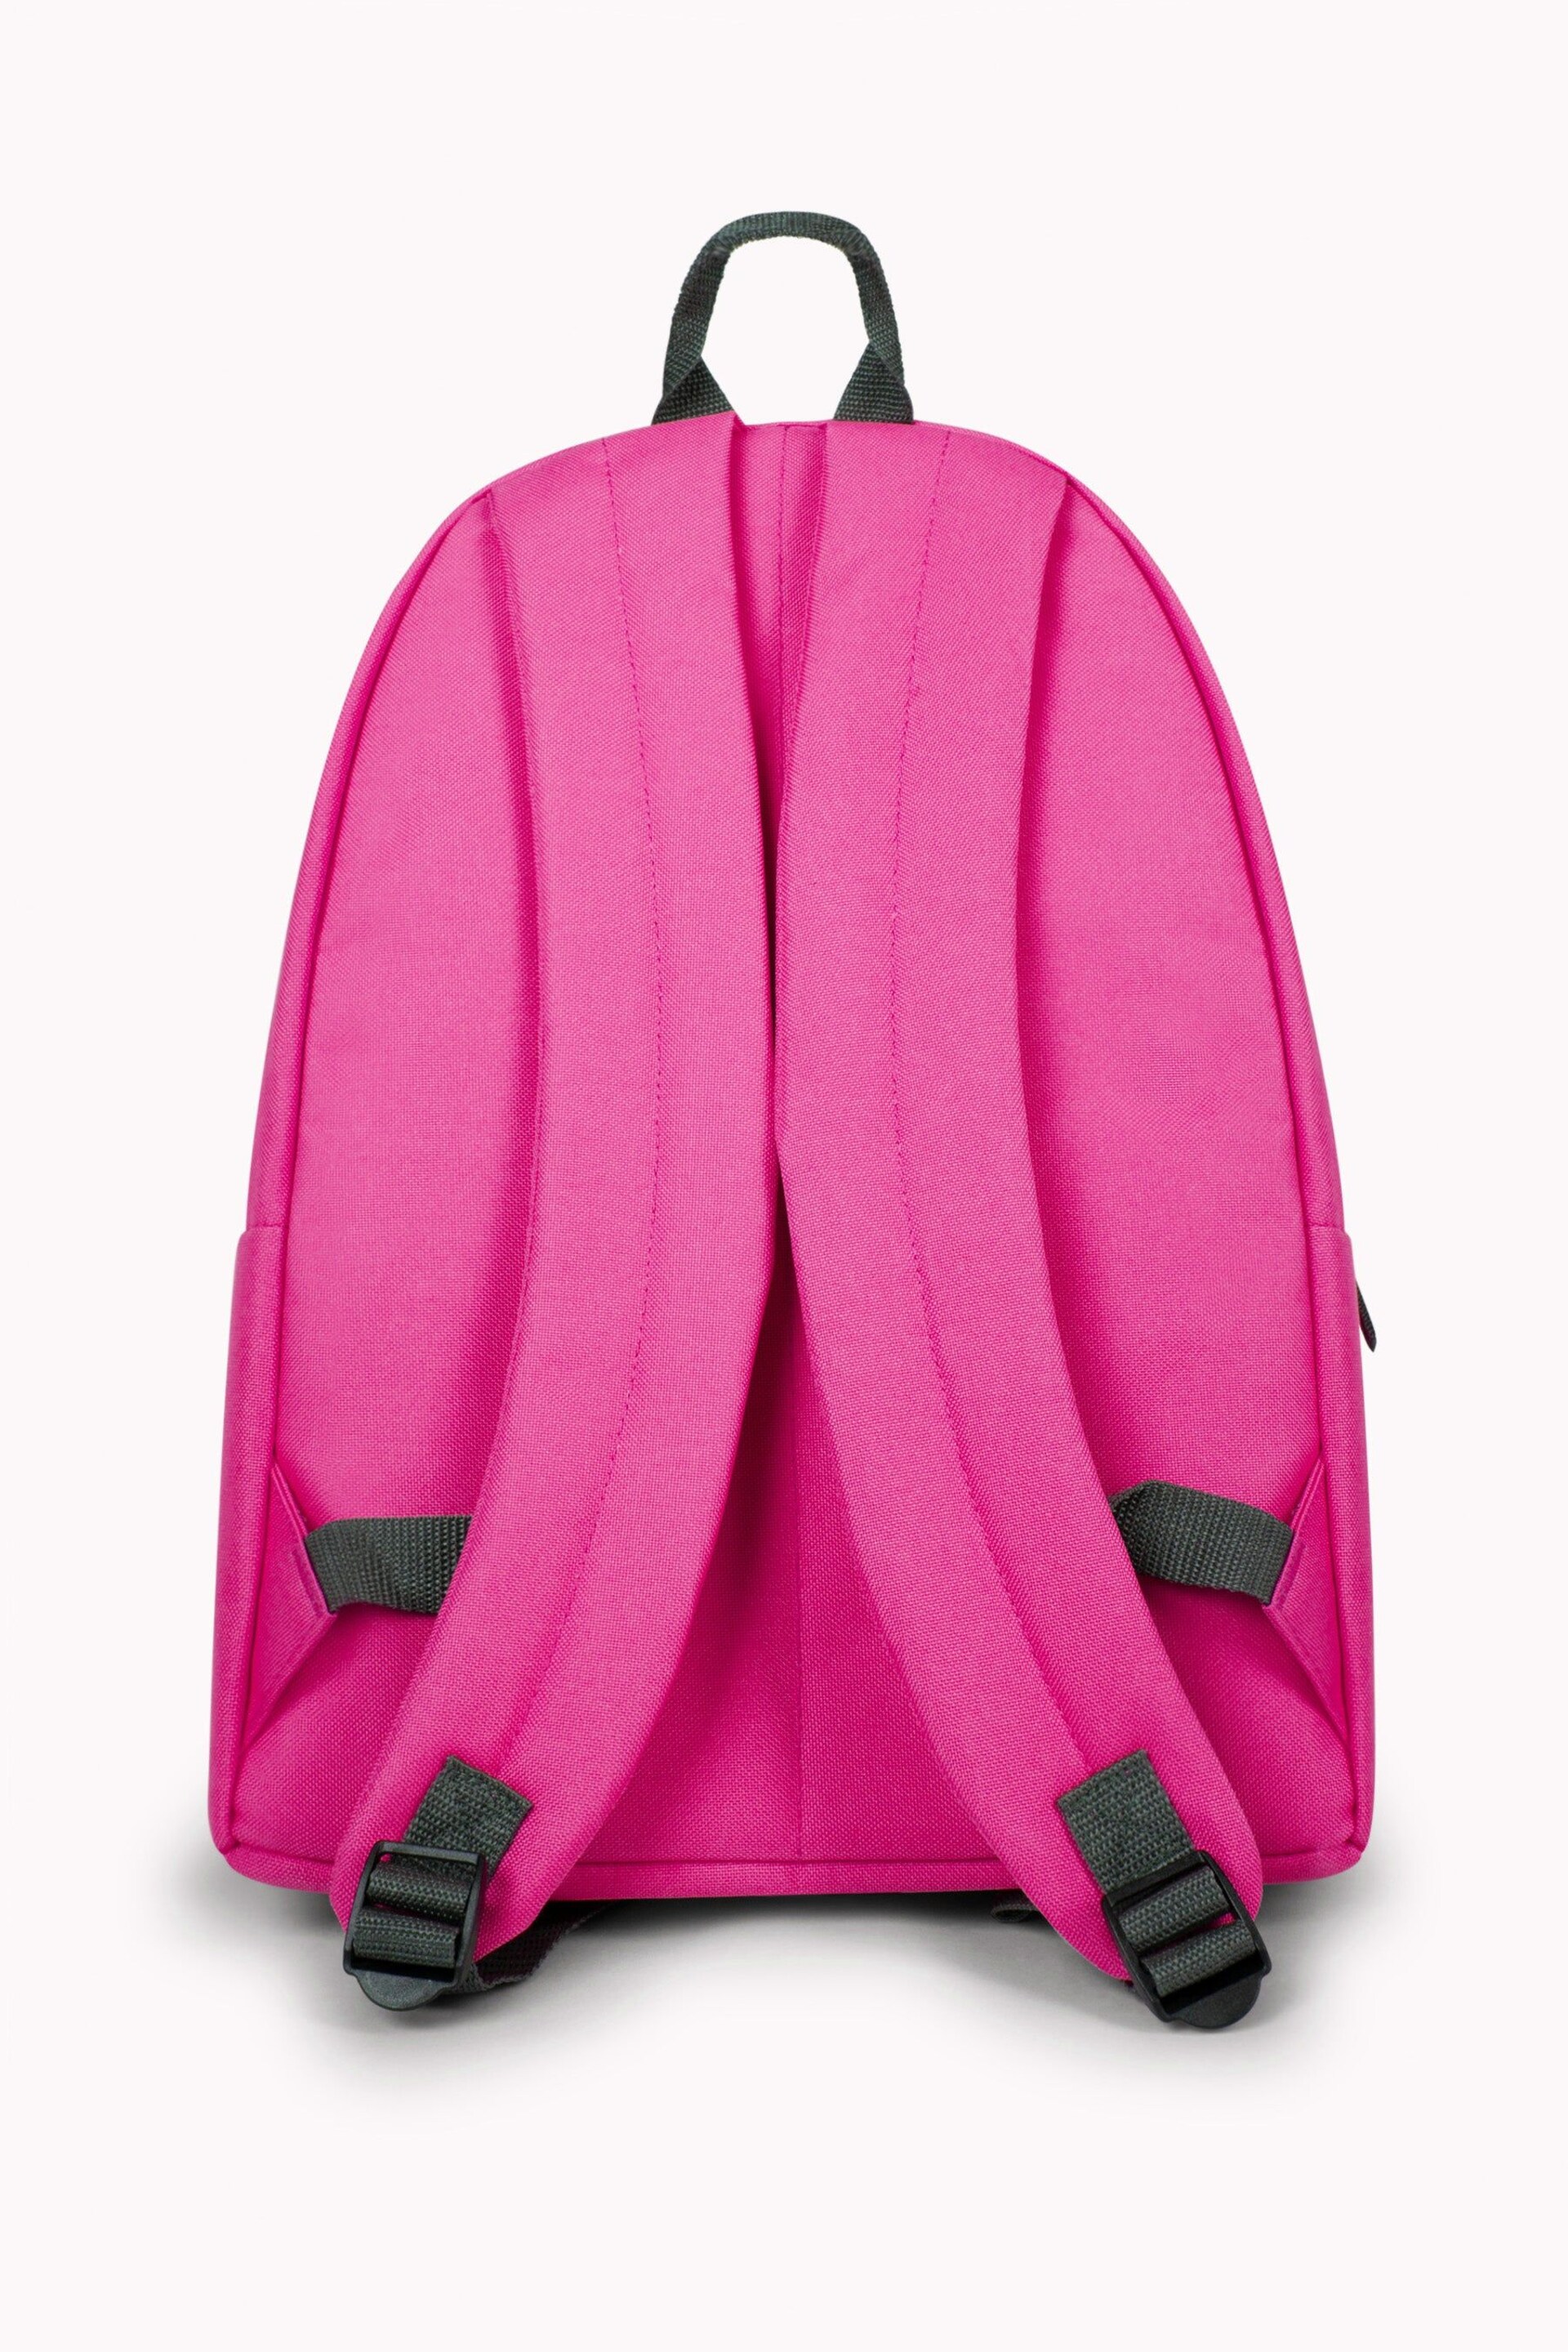 Hype. Iconic Backpack - Image 3 of 6